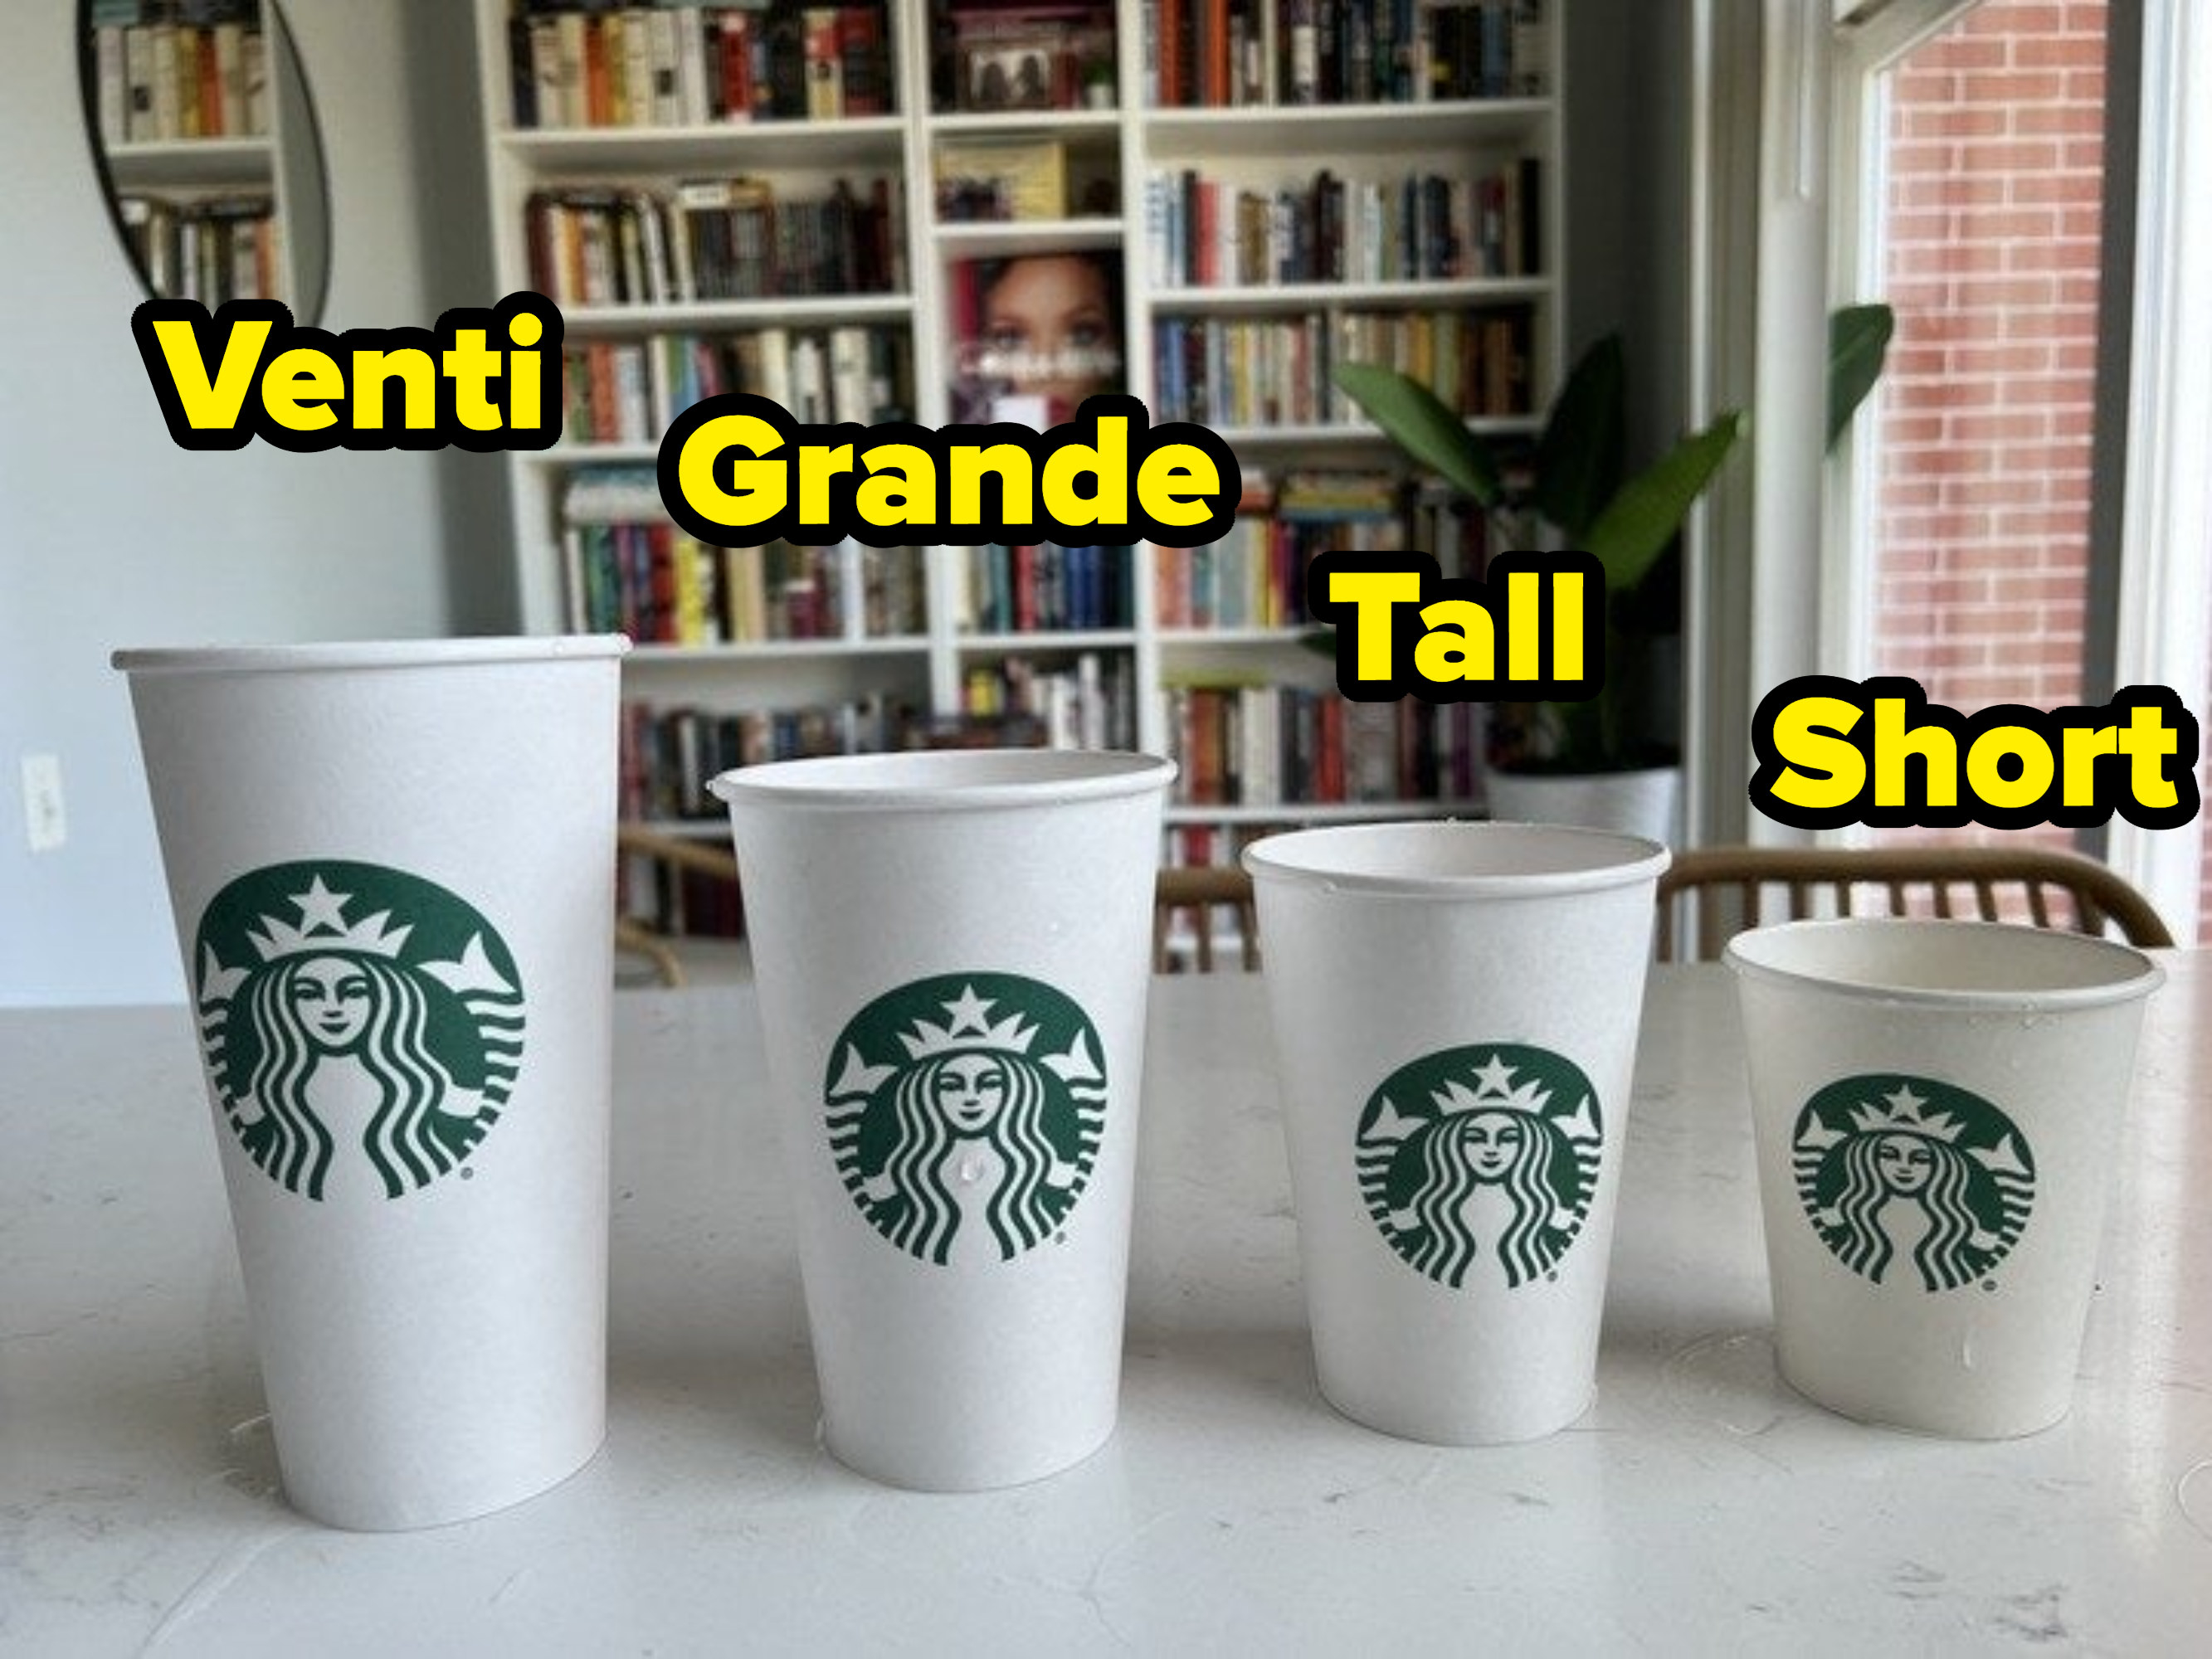 Four Starbucks cups arranged from smallest to largest, with their respective names labeled; all four cups are standing right side up